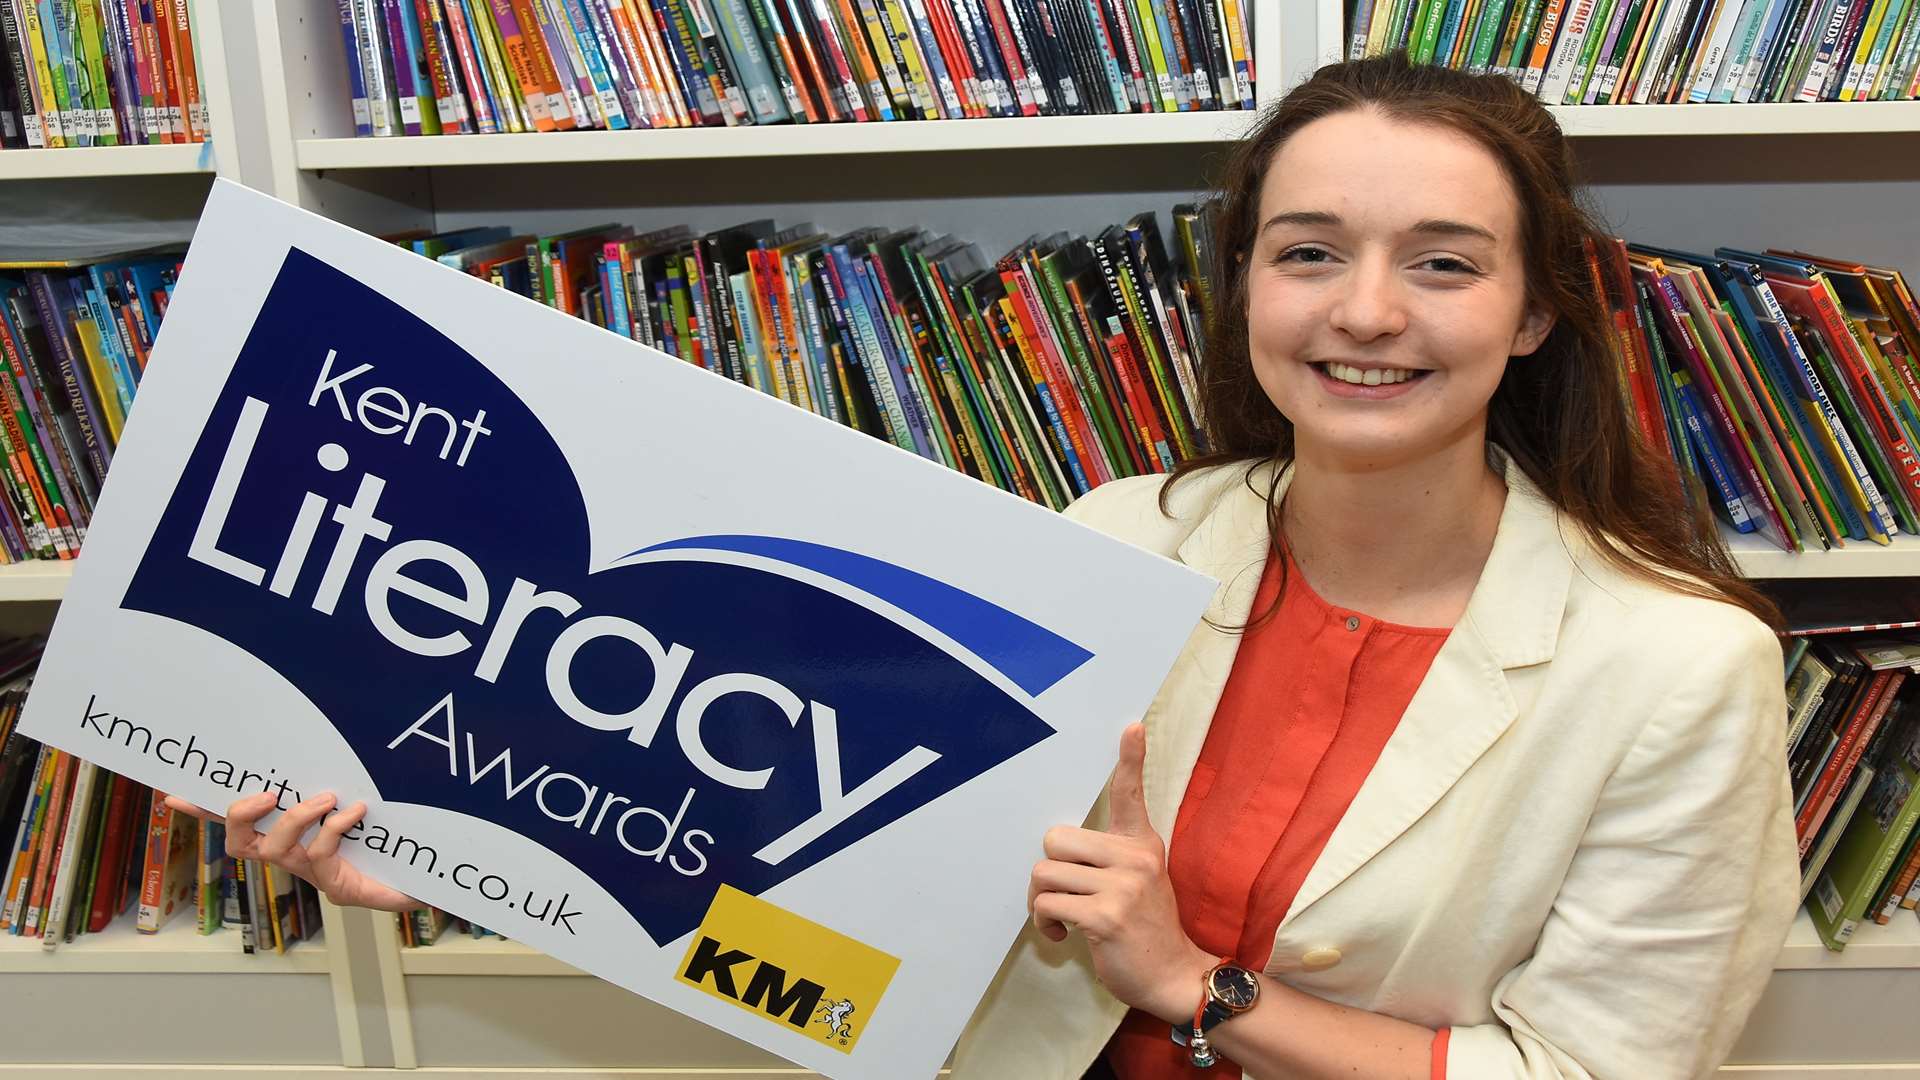 Vicki Lyden of The Canterbury Tales shows her support for the Kent Literacy Awards which remain open for nominations until April 29.